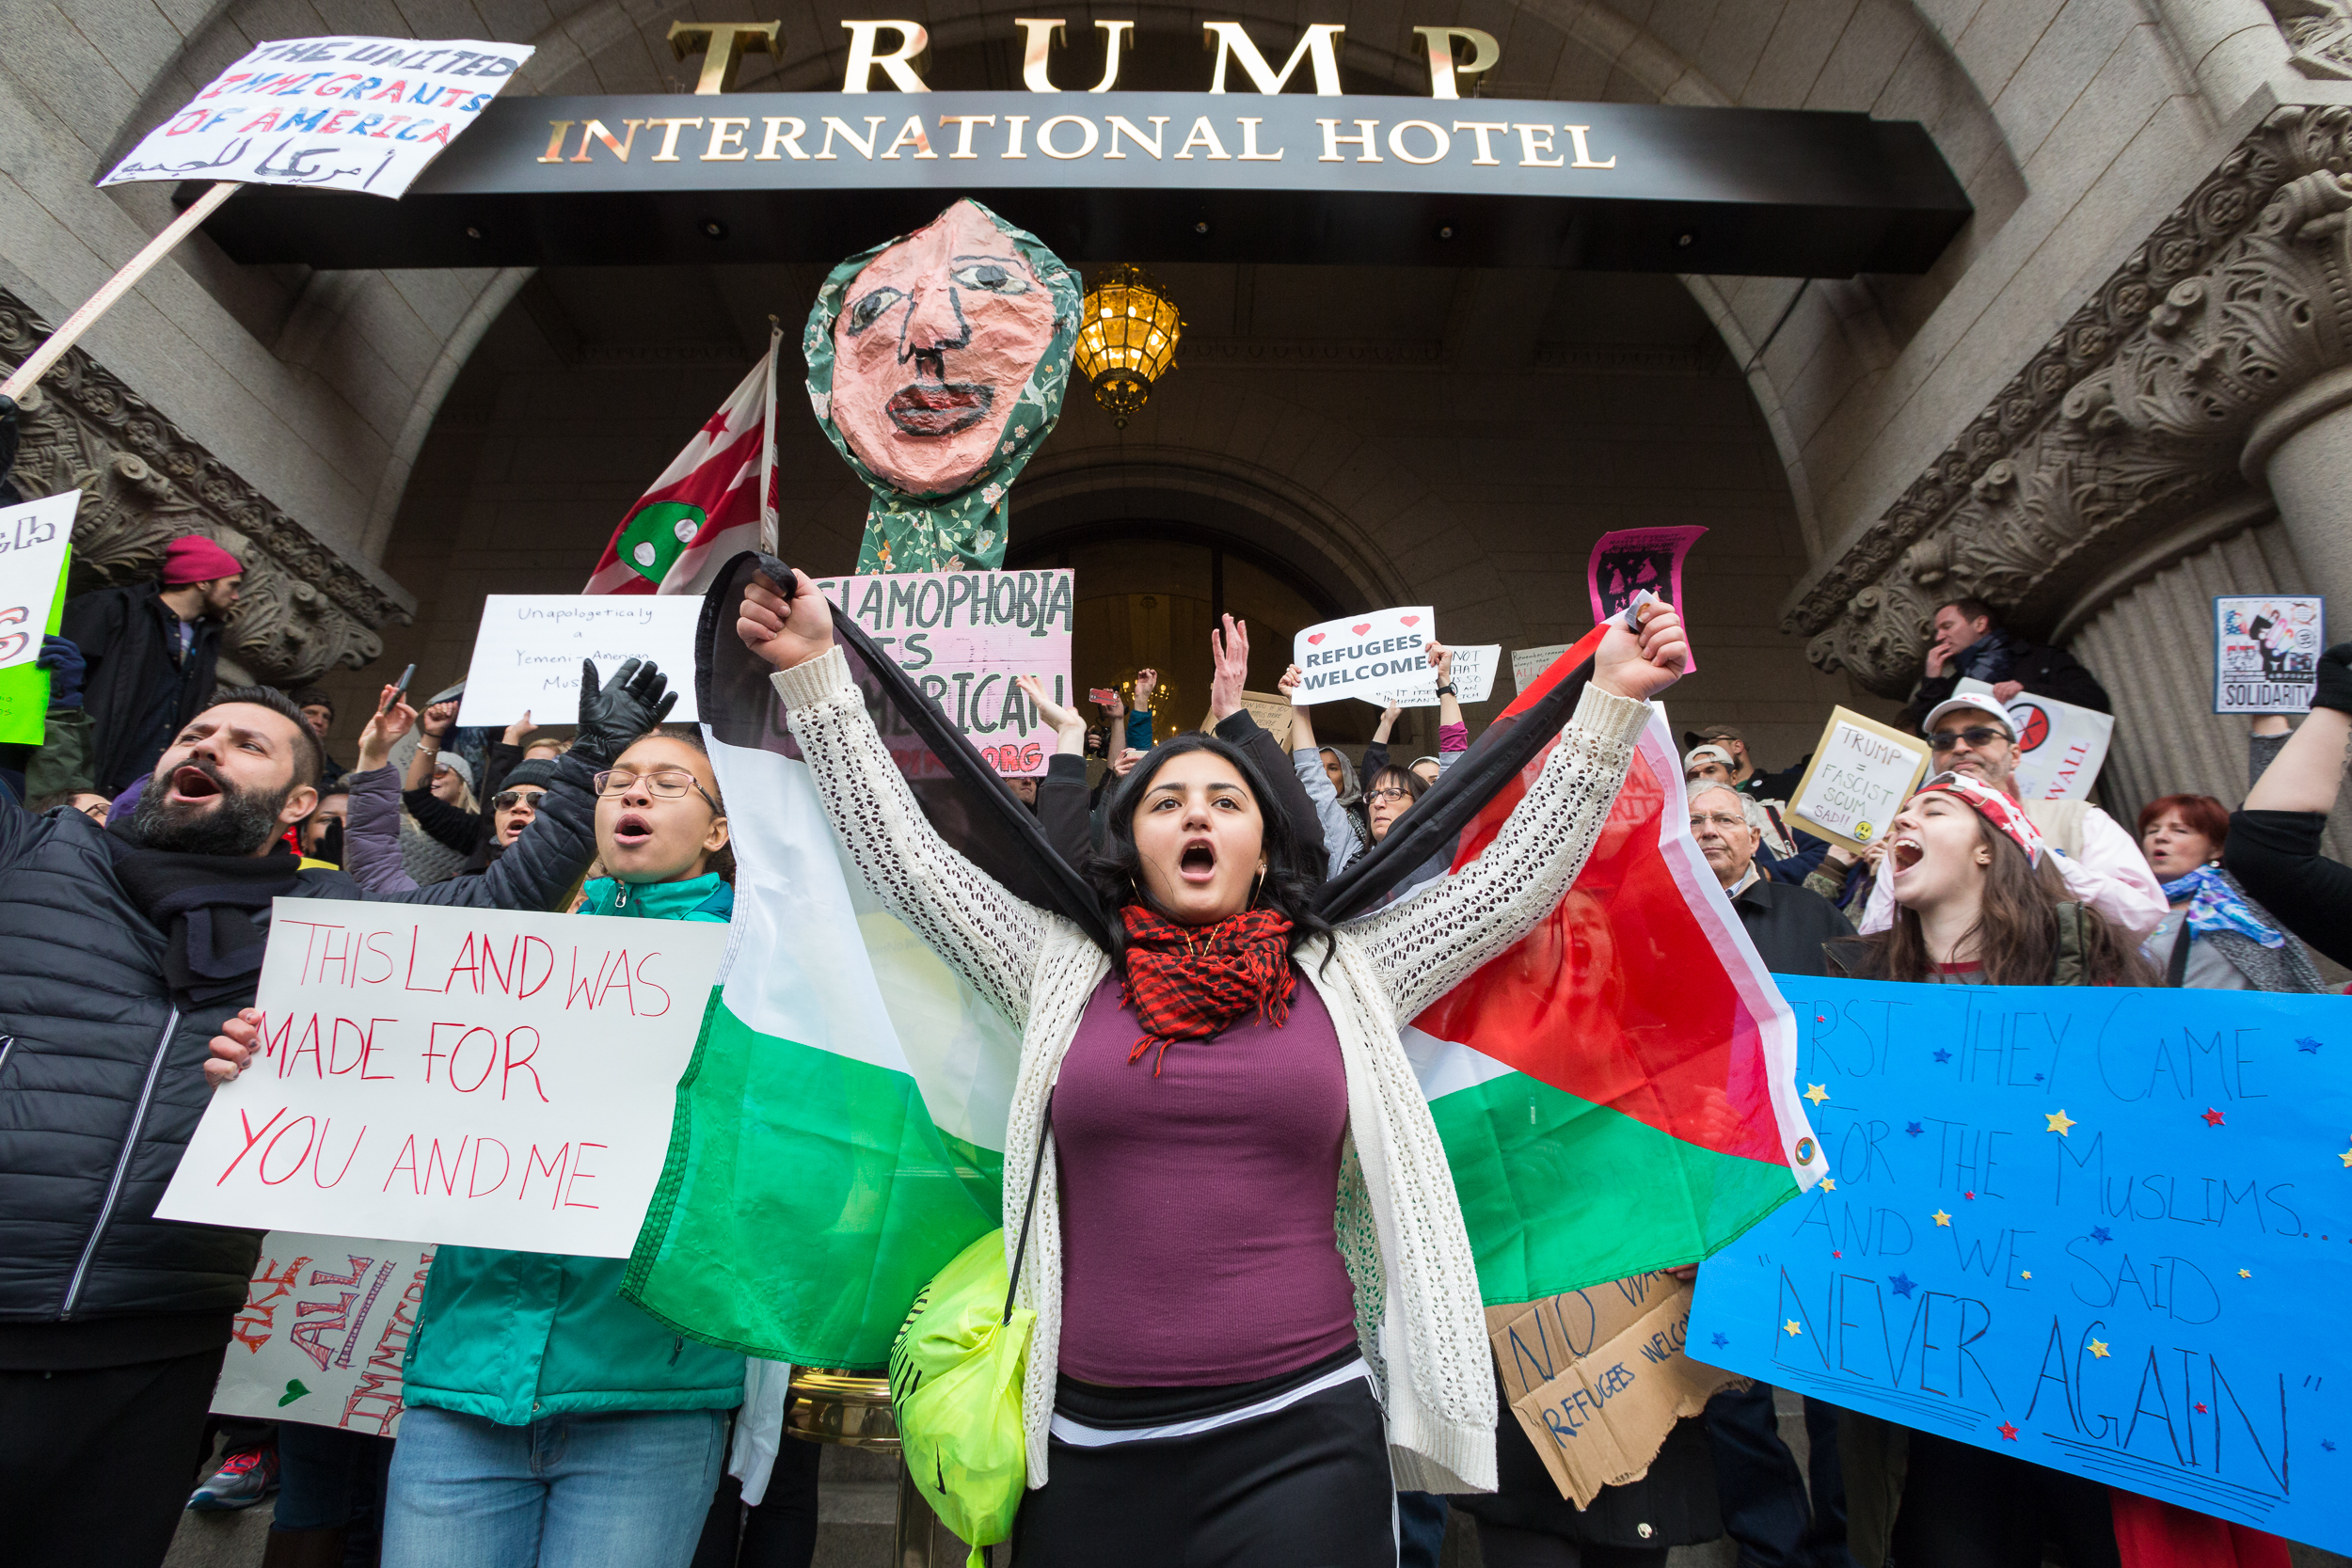  Protesters demonstrate at the Trump International Hotel in Washington, DC., Jan. 29, 2017. 